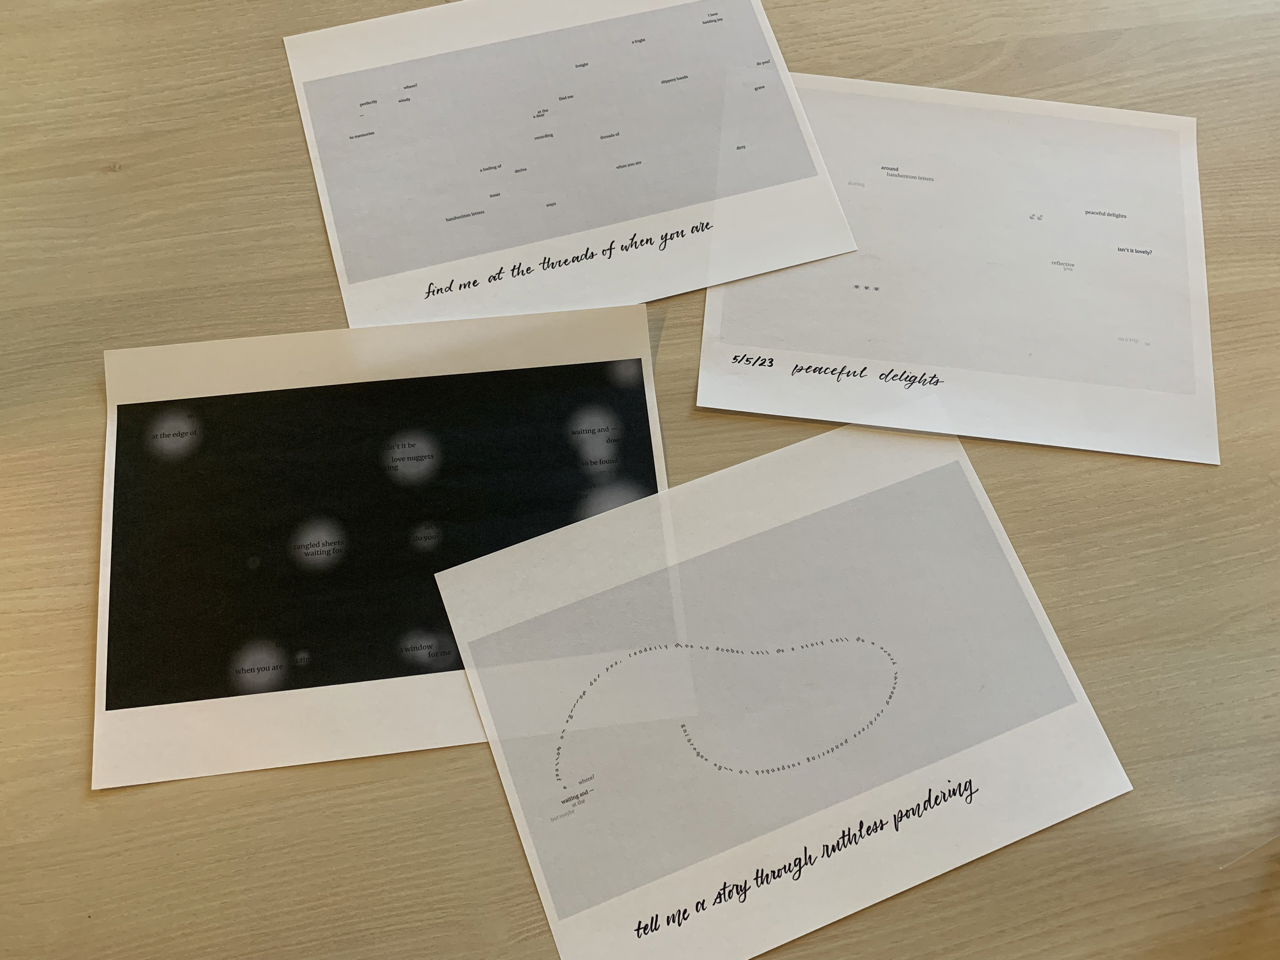 four sheets of paper on a table with poems printed on them